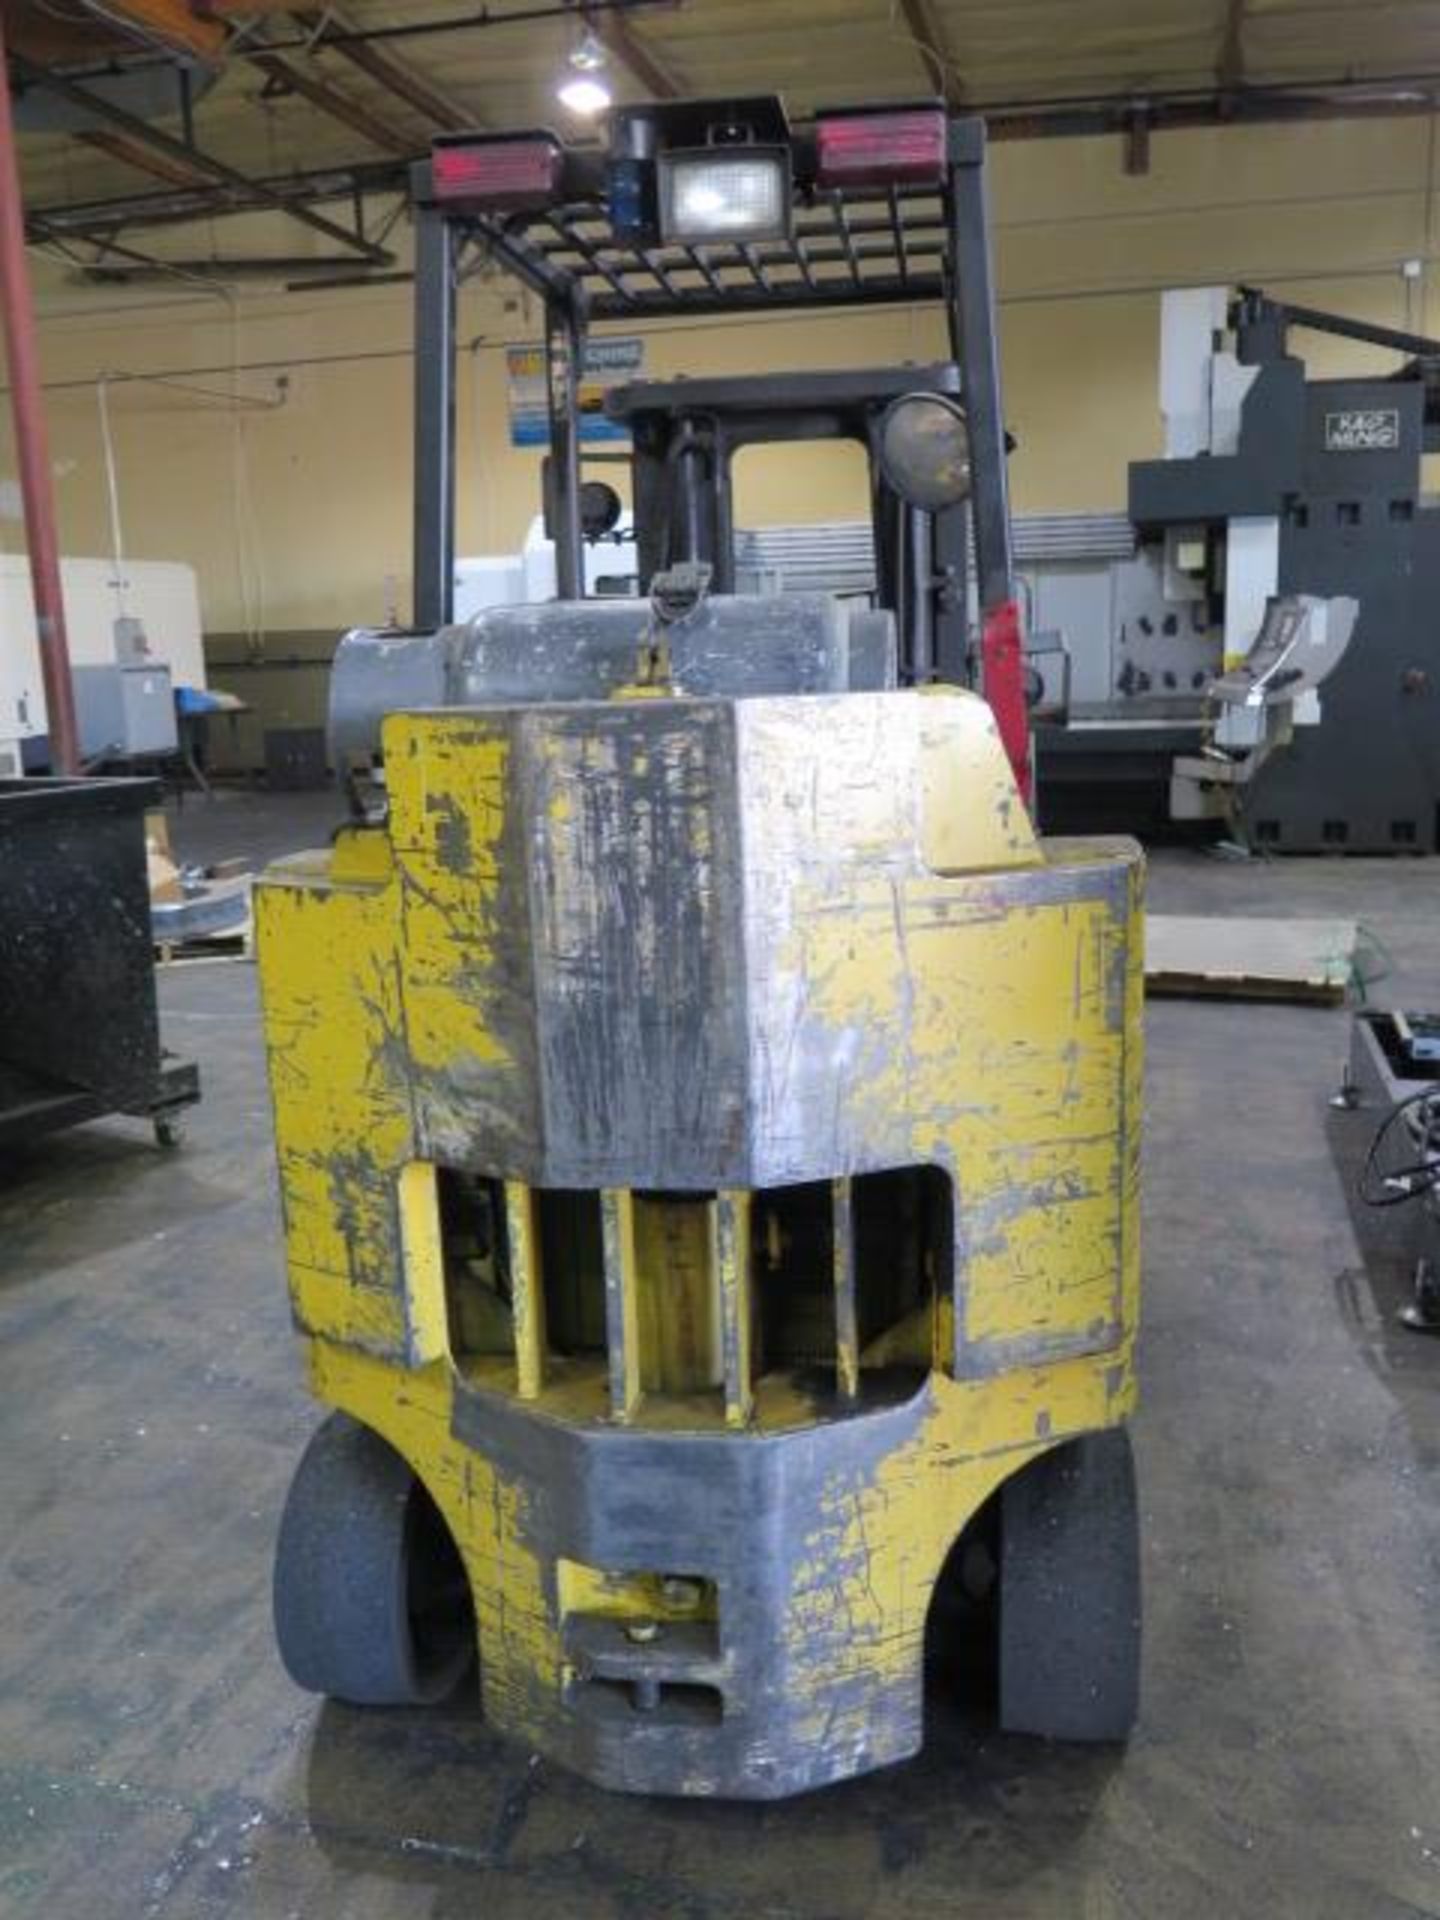 Hyster S80XLBCS 8000 Lb Cap LPG Forklift s/n Doo4D06798W w/ 3-Stage Mast, 170” Lift, SOLD AS IS - Image 2 of 15